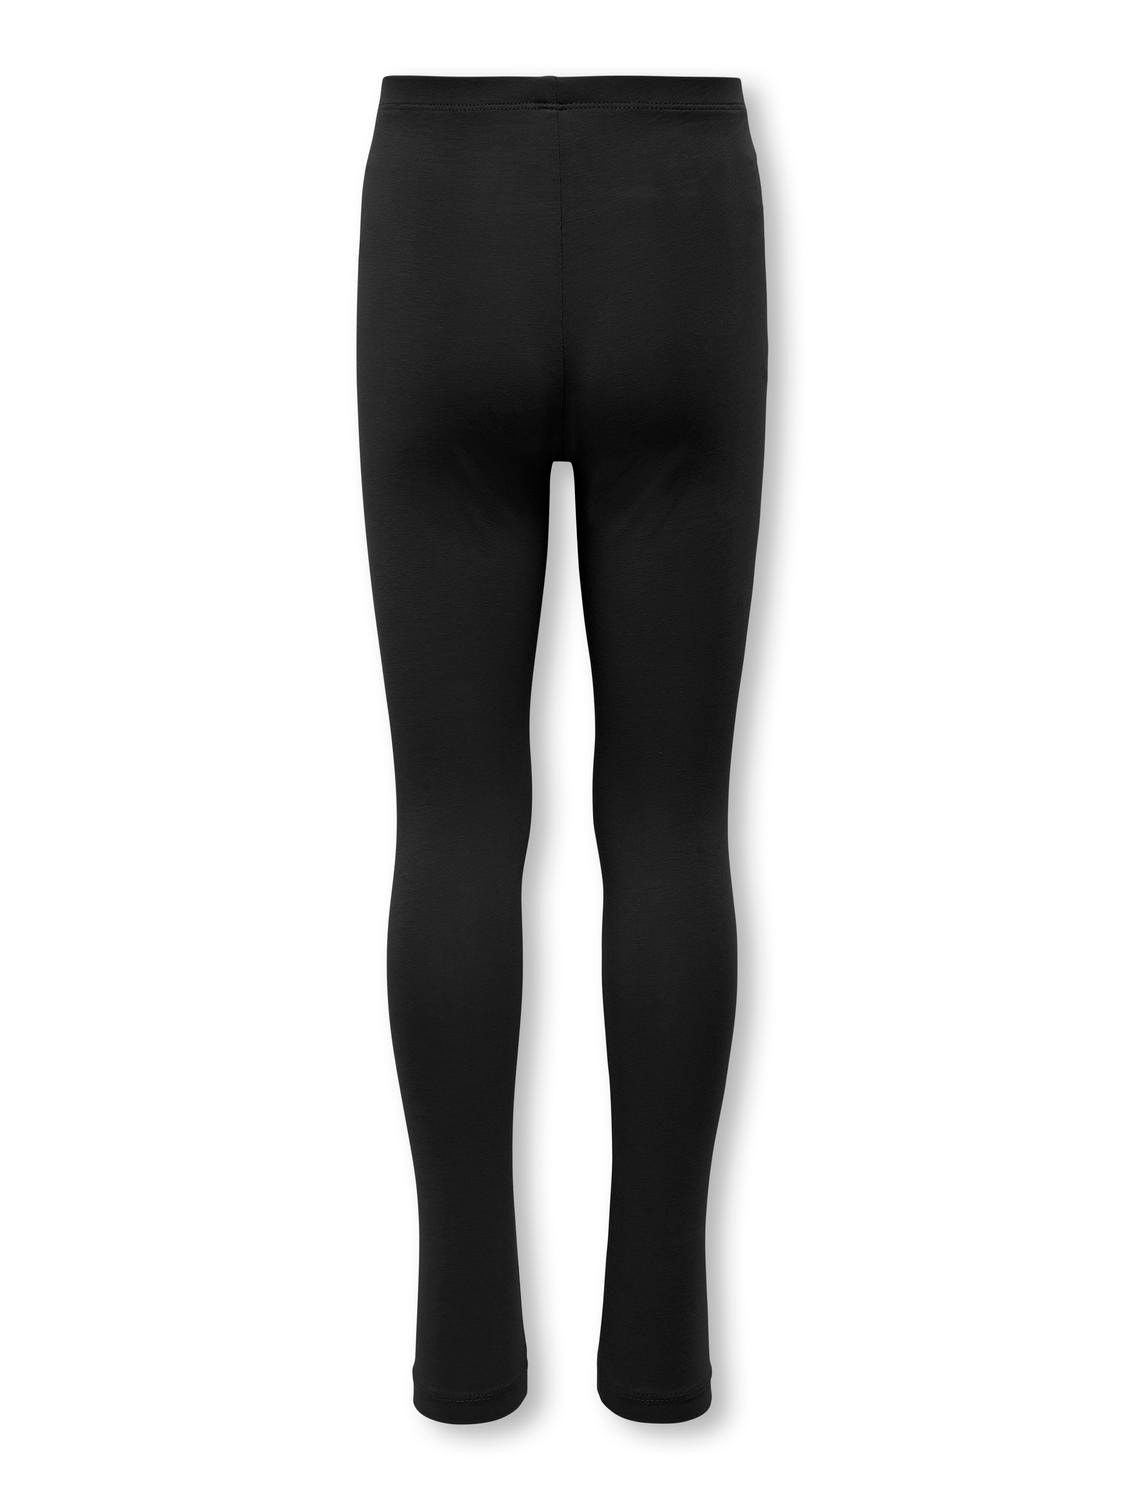 ONLY Leggings with mid waist -Black - 15300232